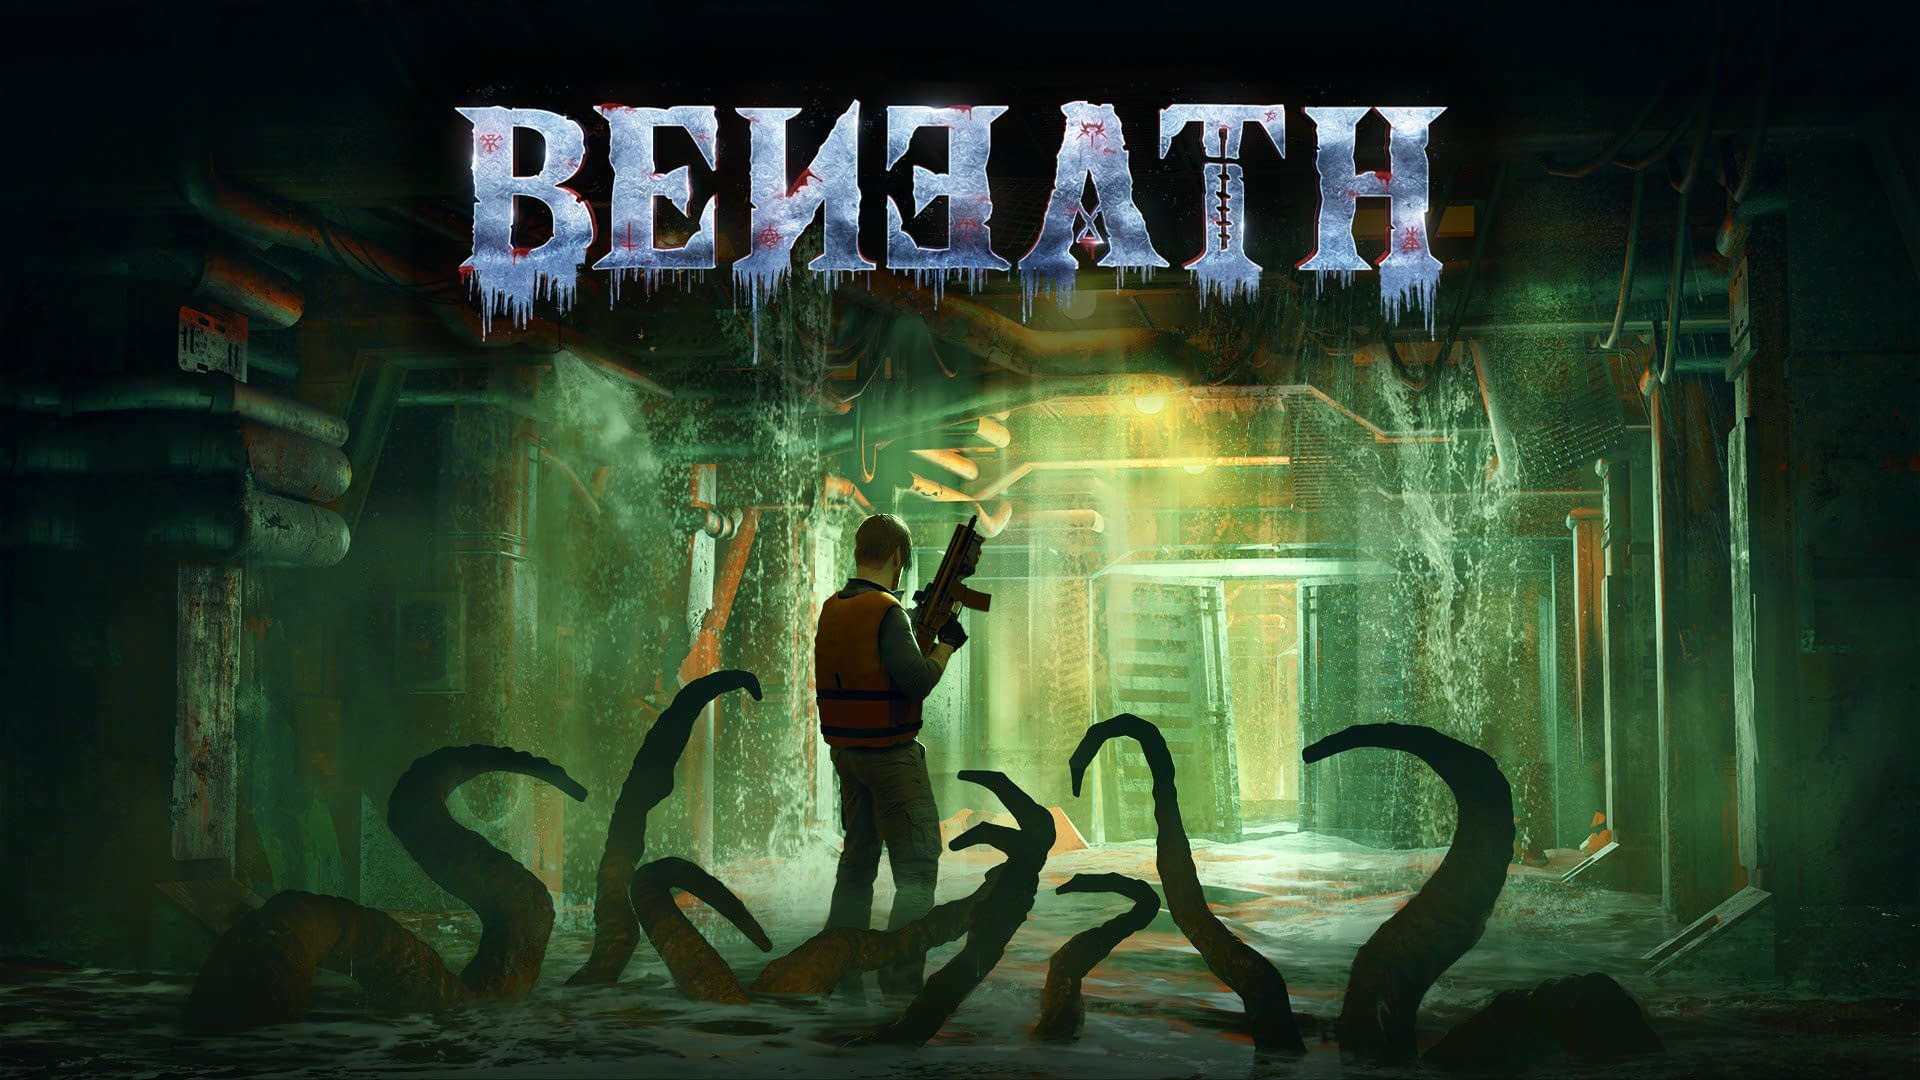 First-person horror action game Beneath announced